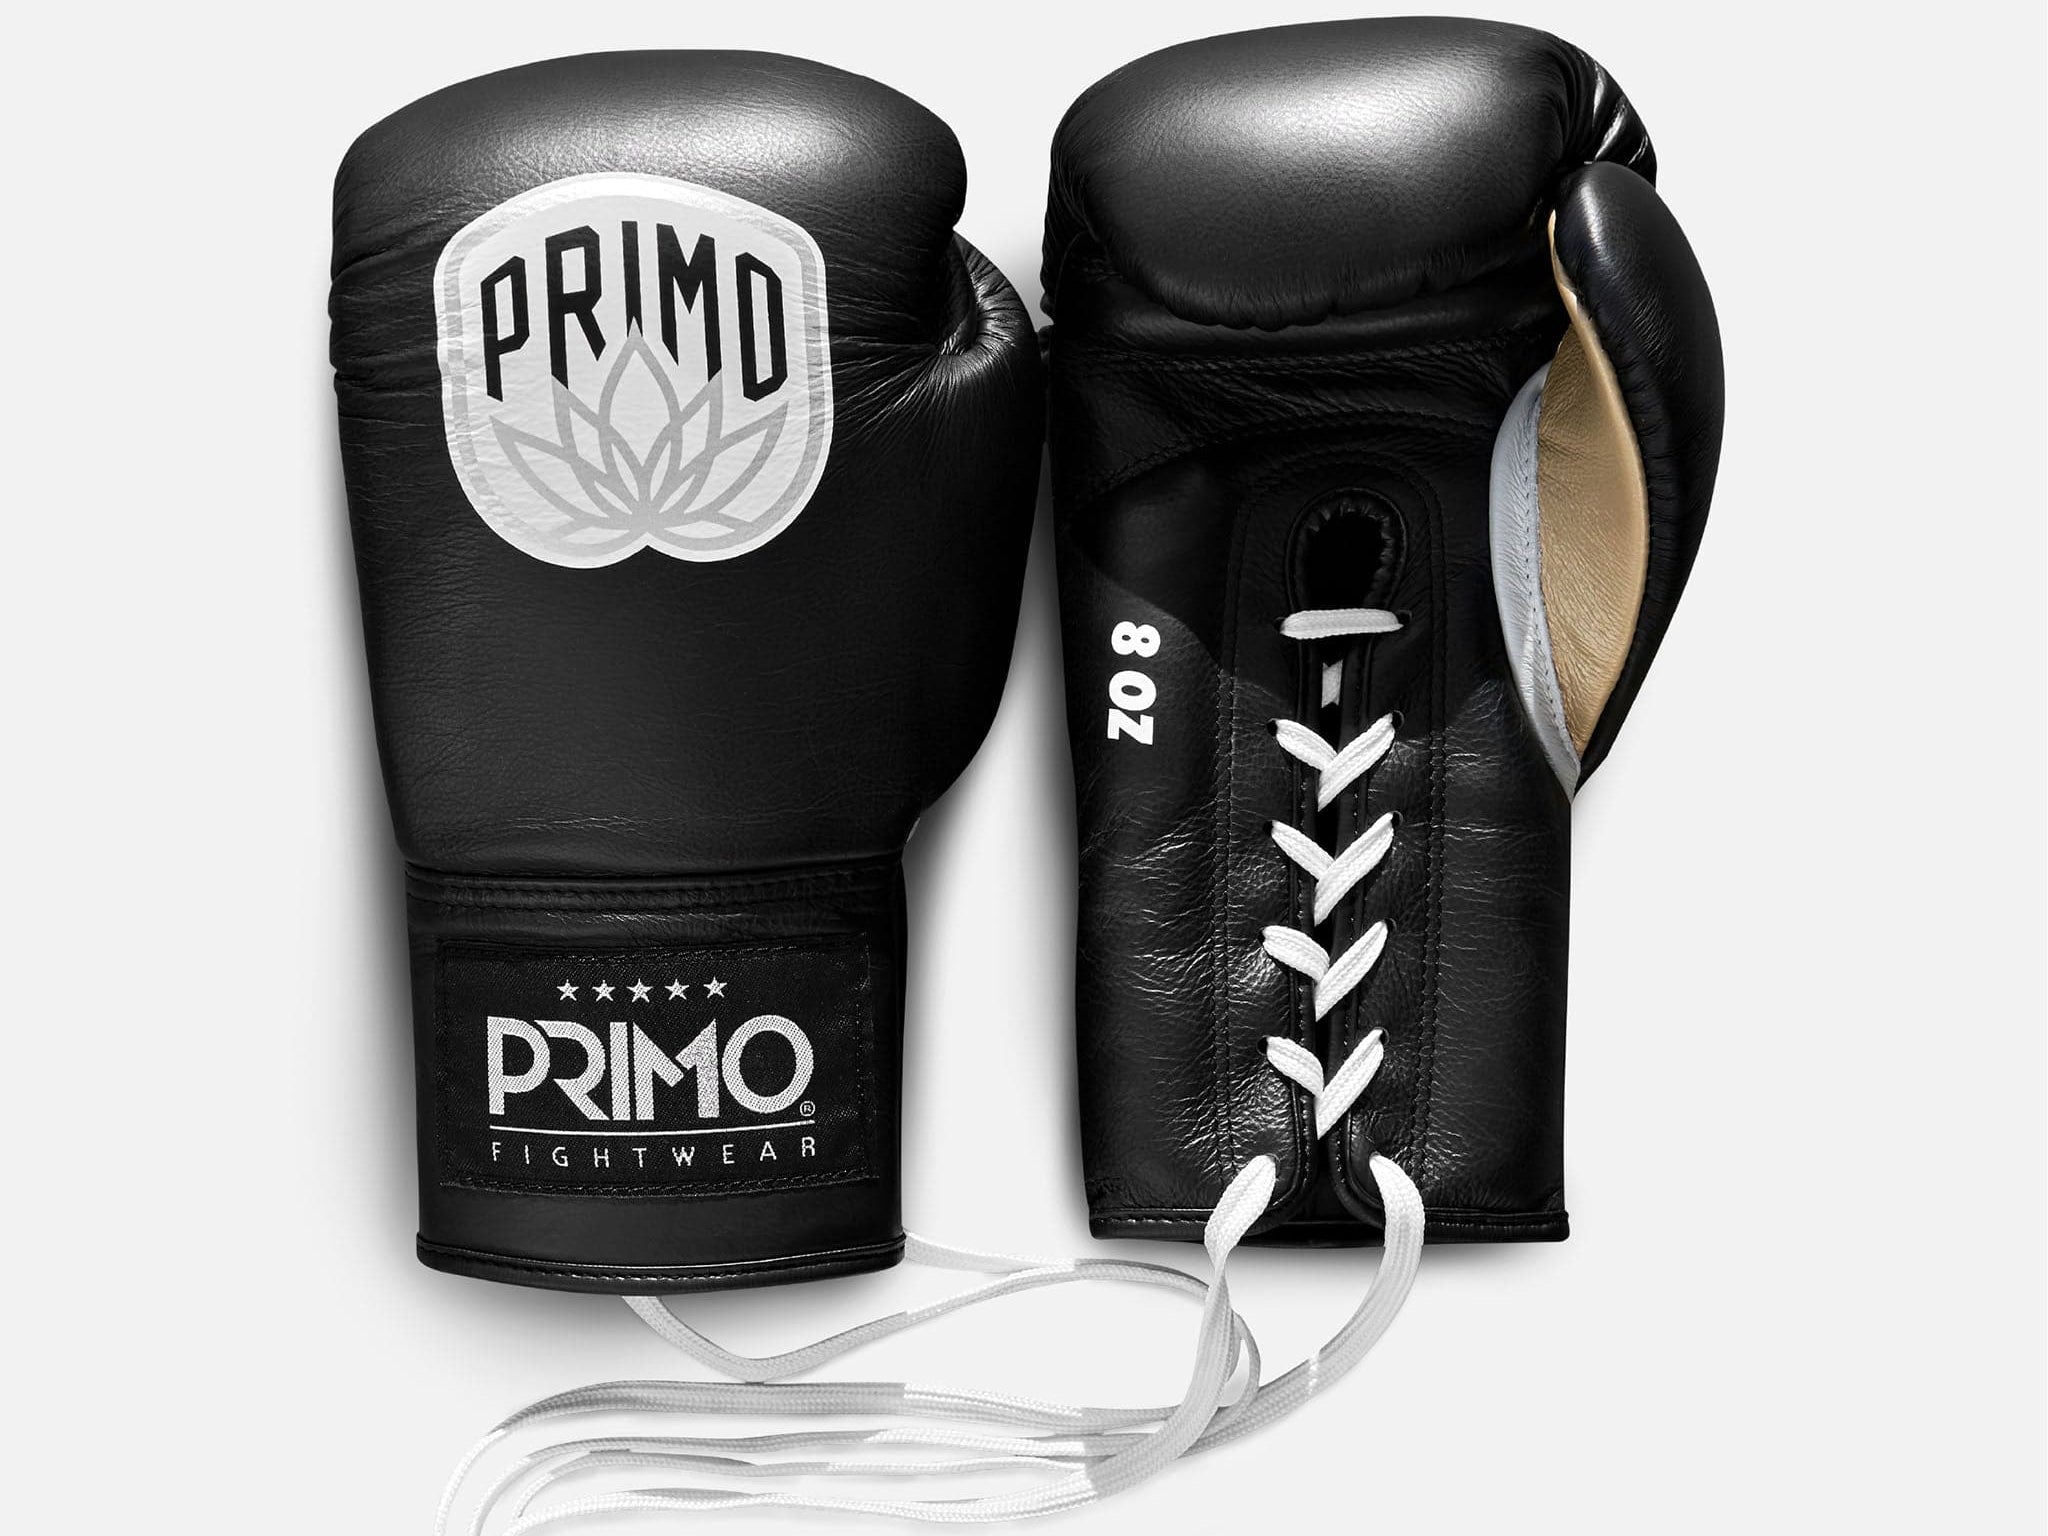 Primo Fight Wear Official Primo Pro Lace Up Boxing Gloves - Onyx Black